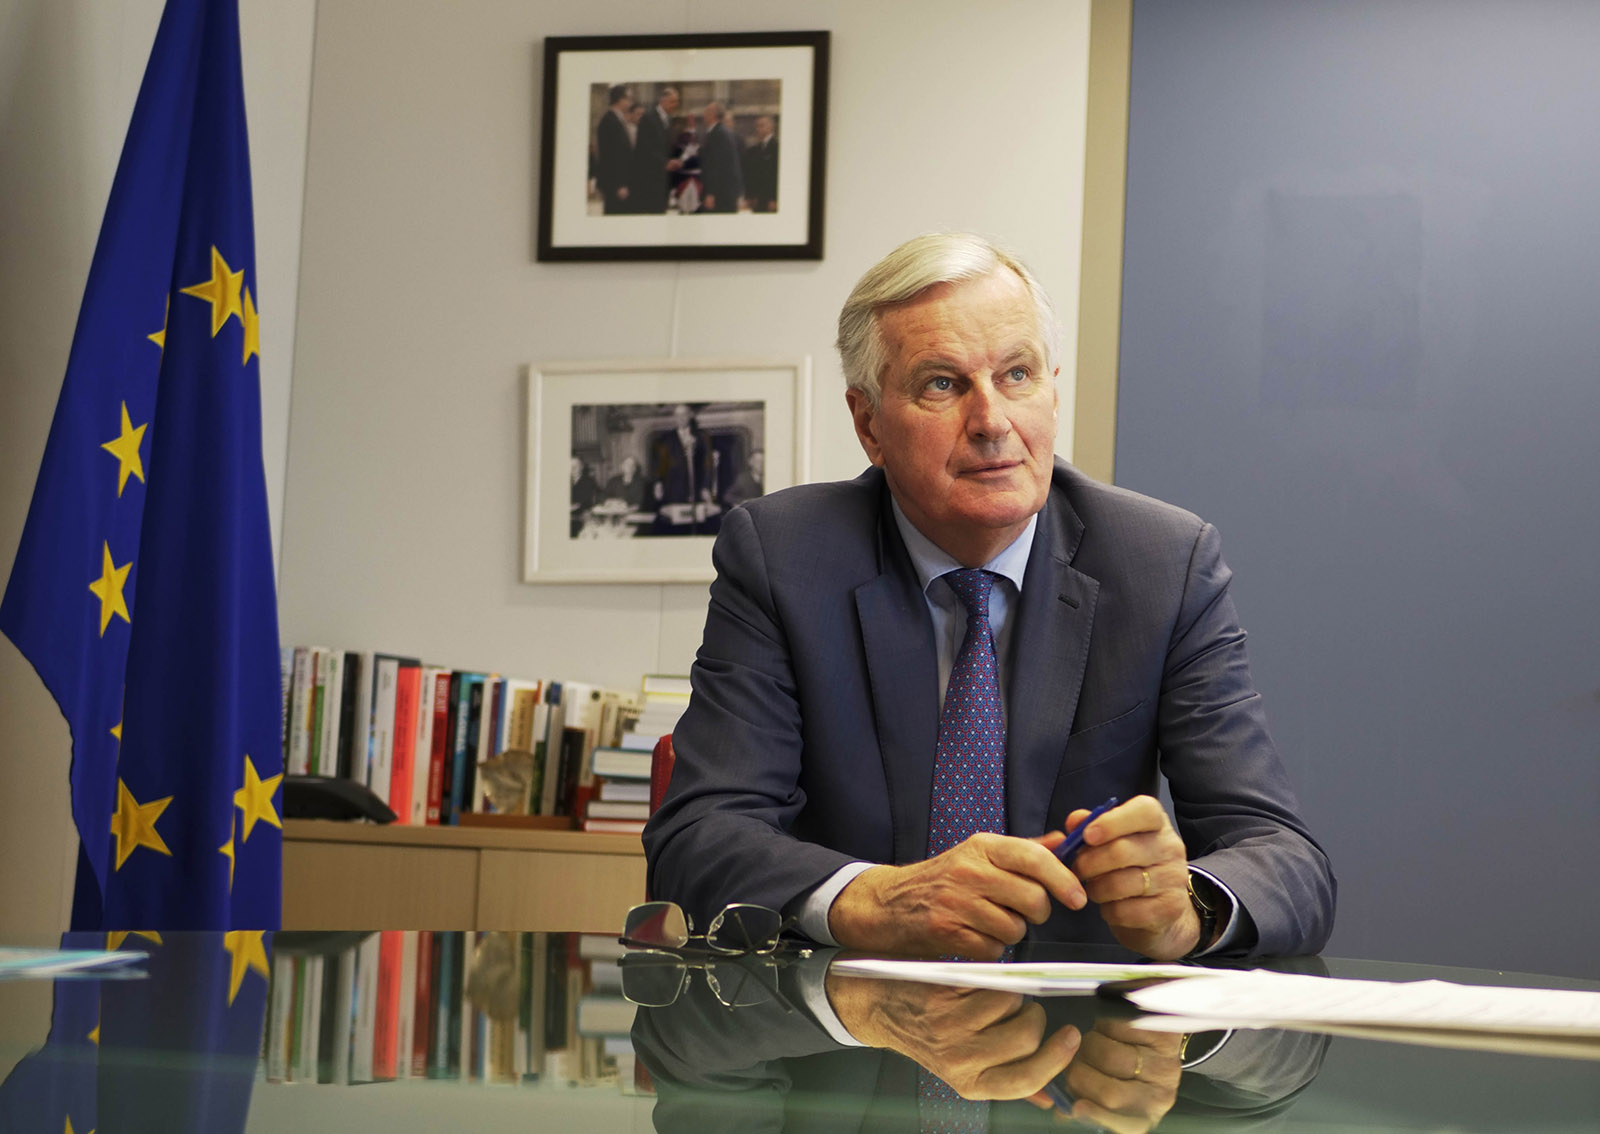 Michel Barnier, the European Commission’s chief negotiator on Brexit, Brussels, Belgium, May 2019